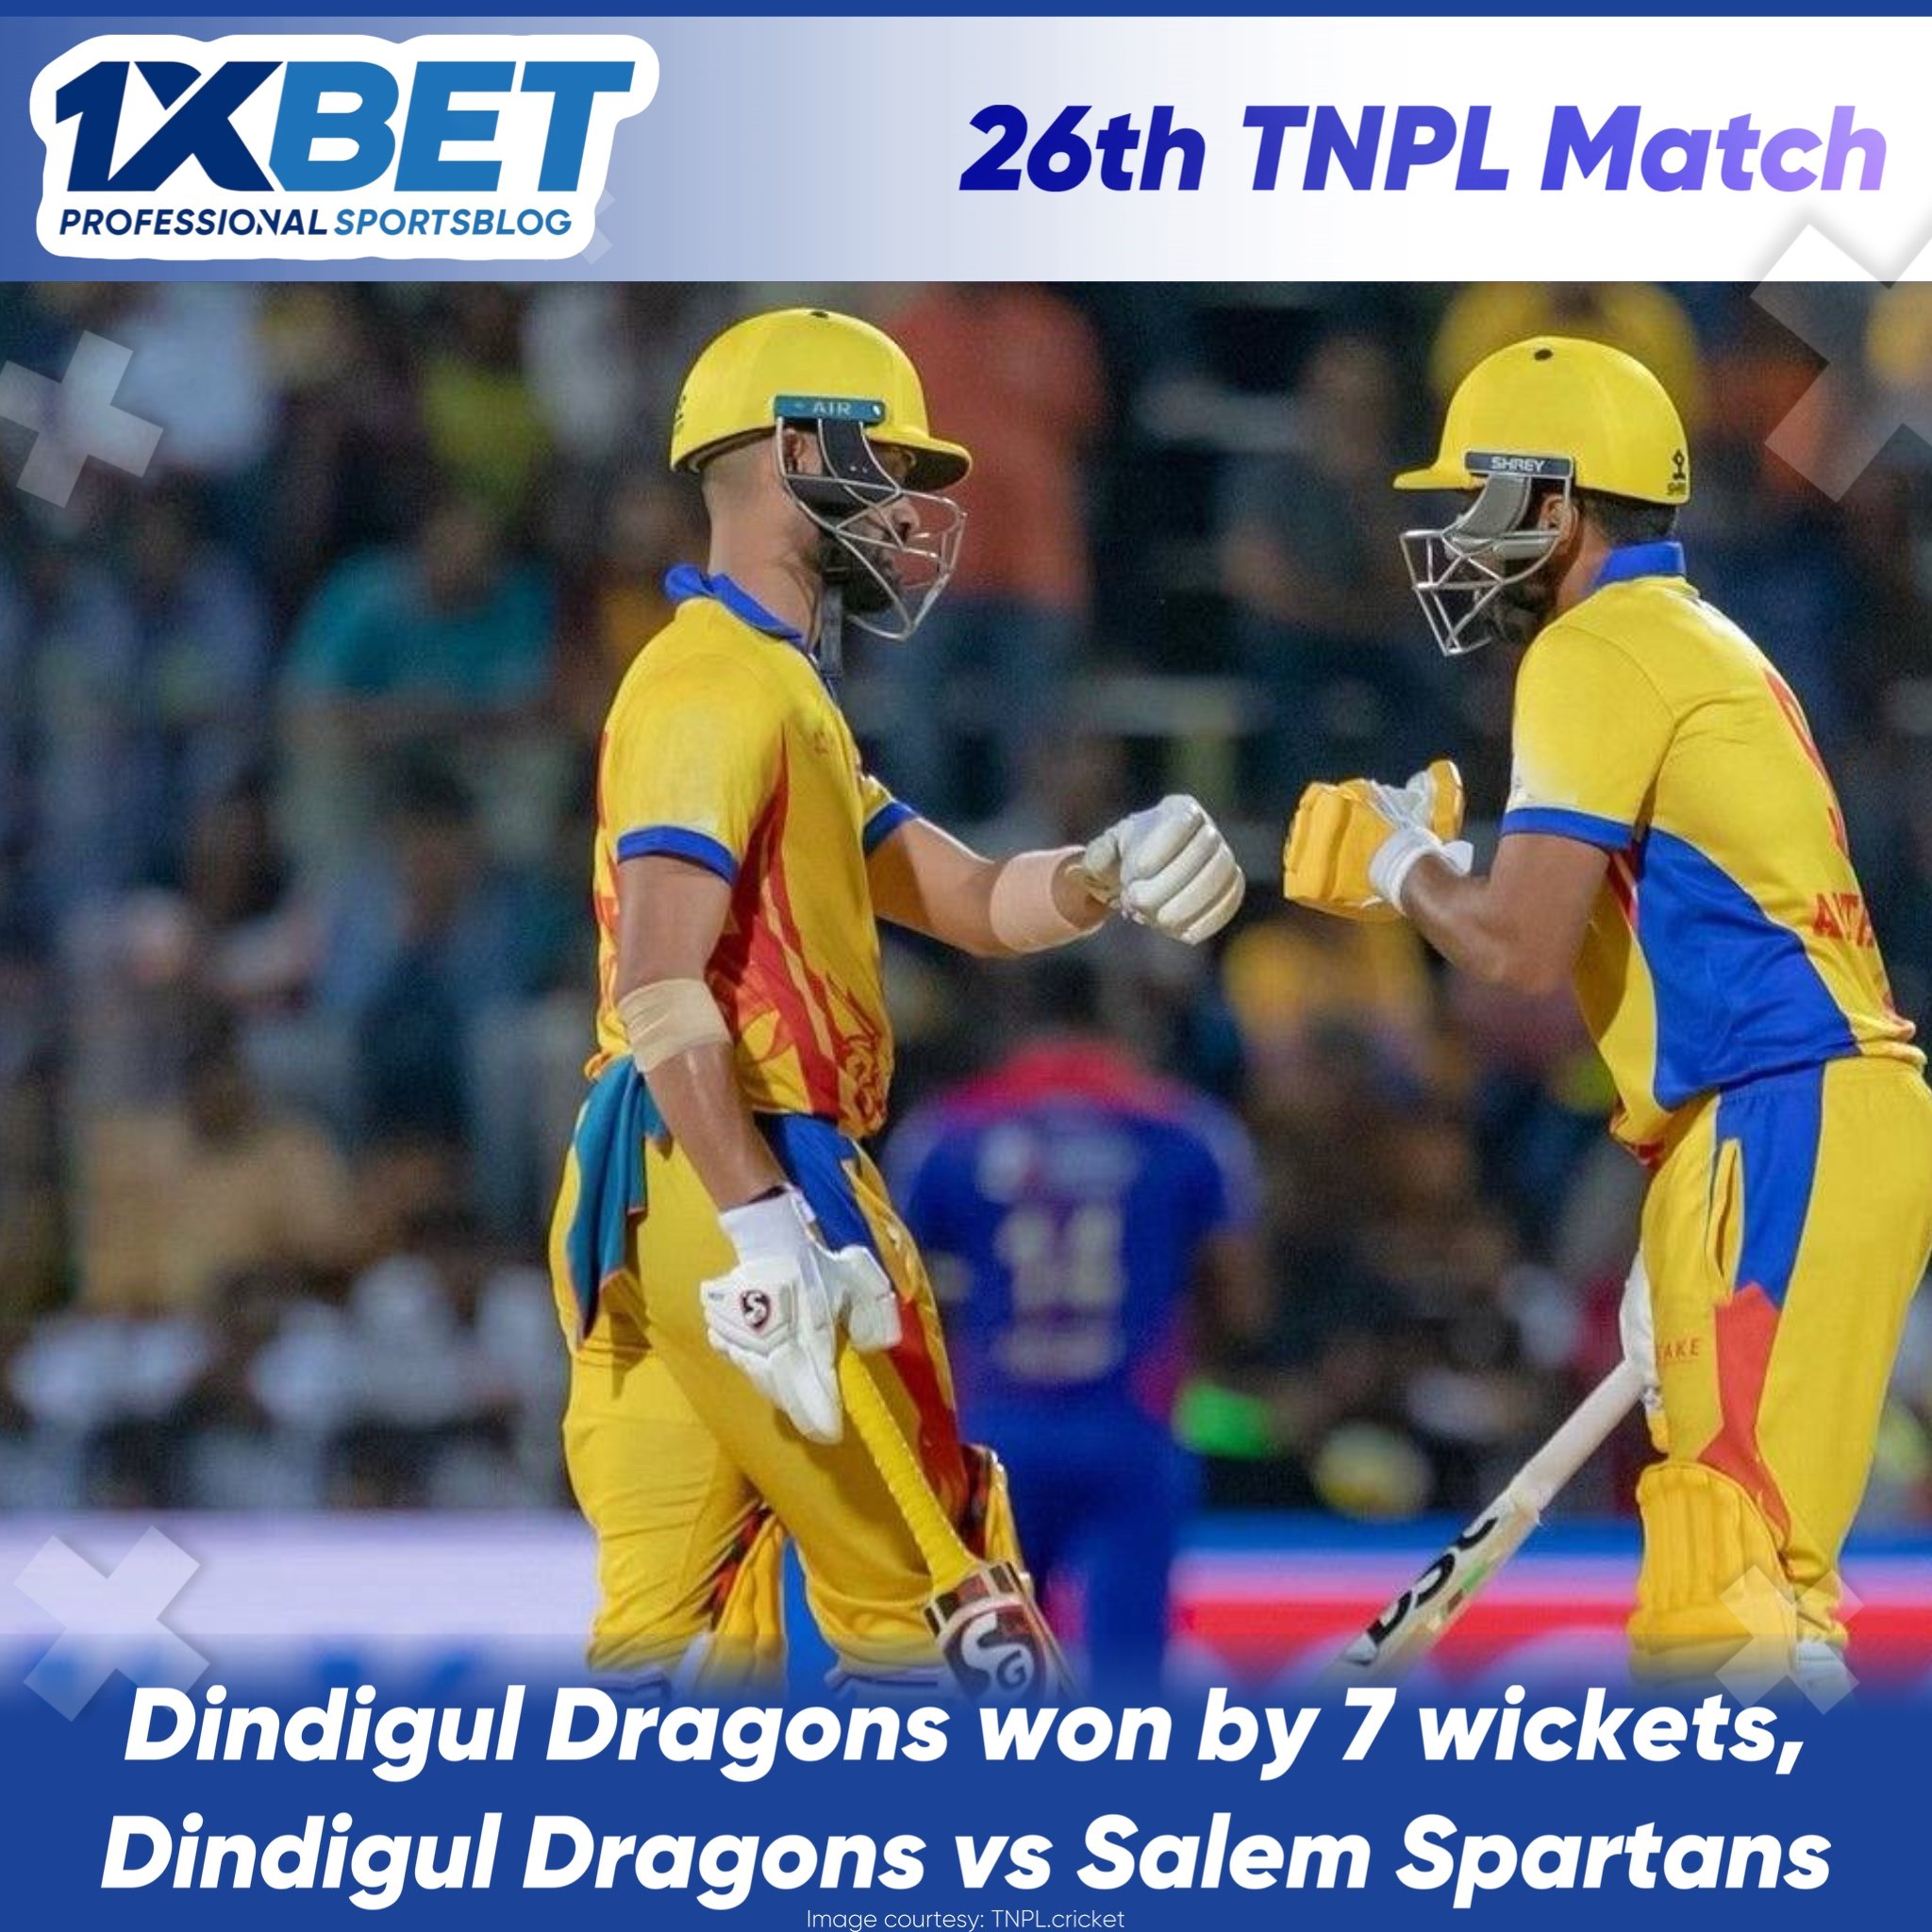 Dindigul Dragons won by 7 wickets